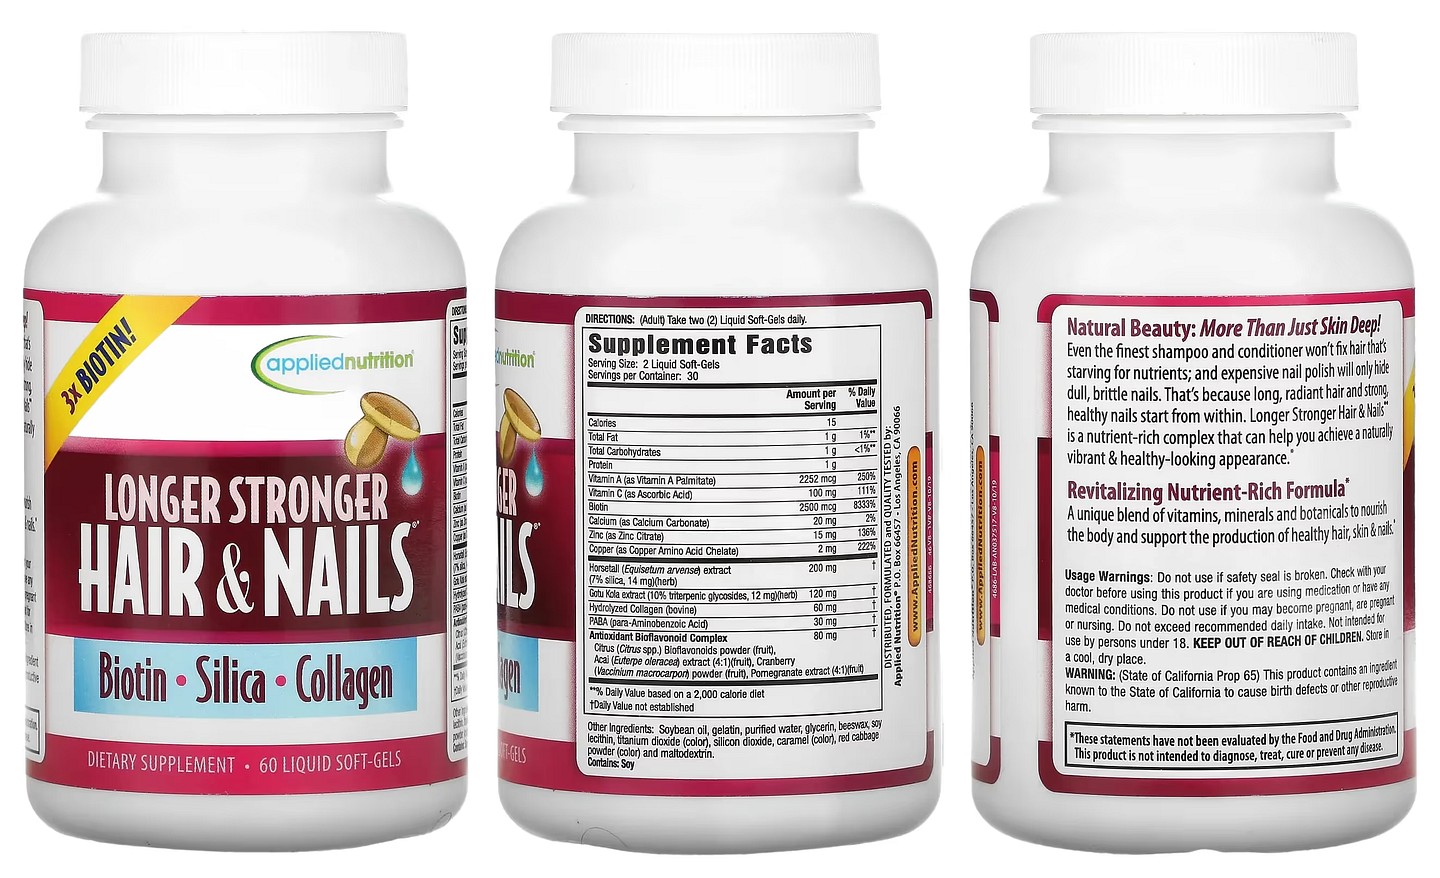 Applied Nutrition, Longer Stronger Hair & Nails packaging